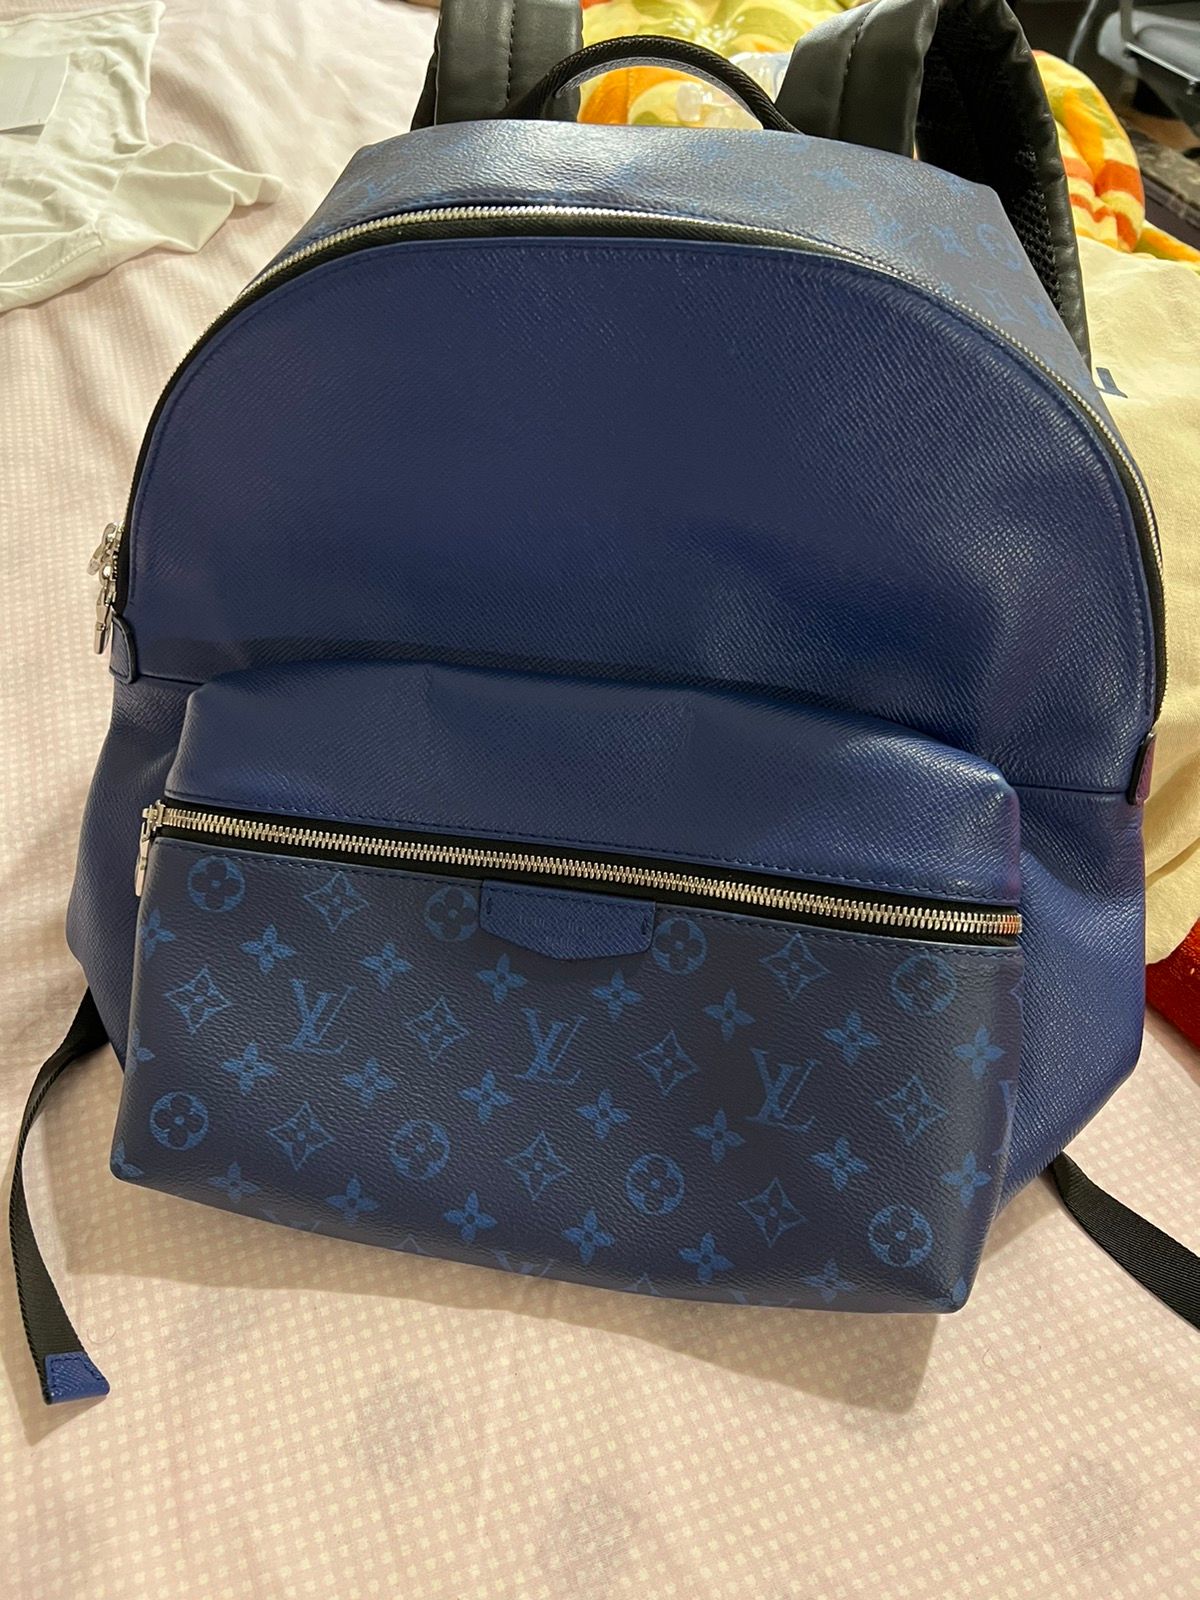 Louis Vuitton Discovery Blue Leather Backpack Bag (Pre-Owned)